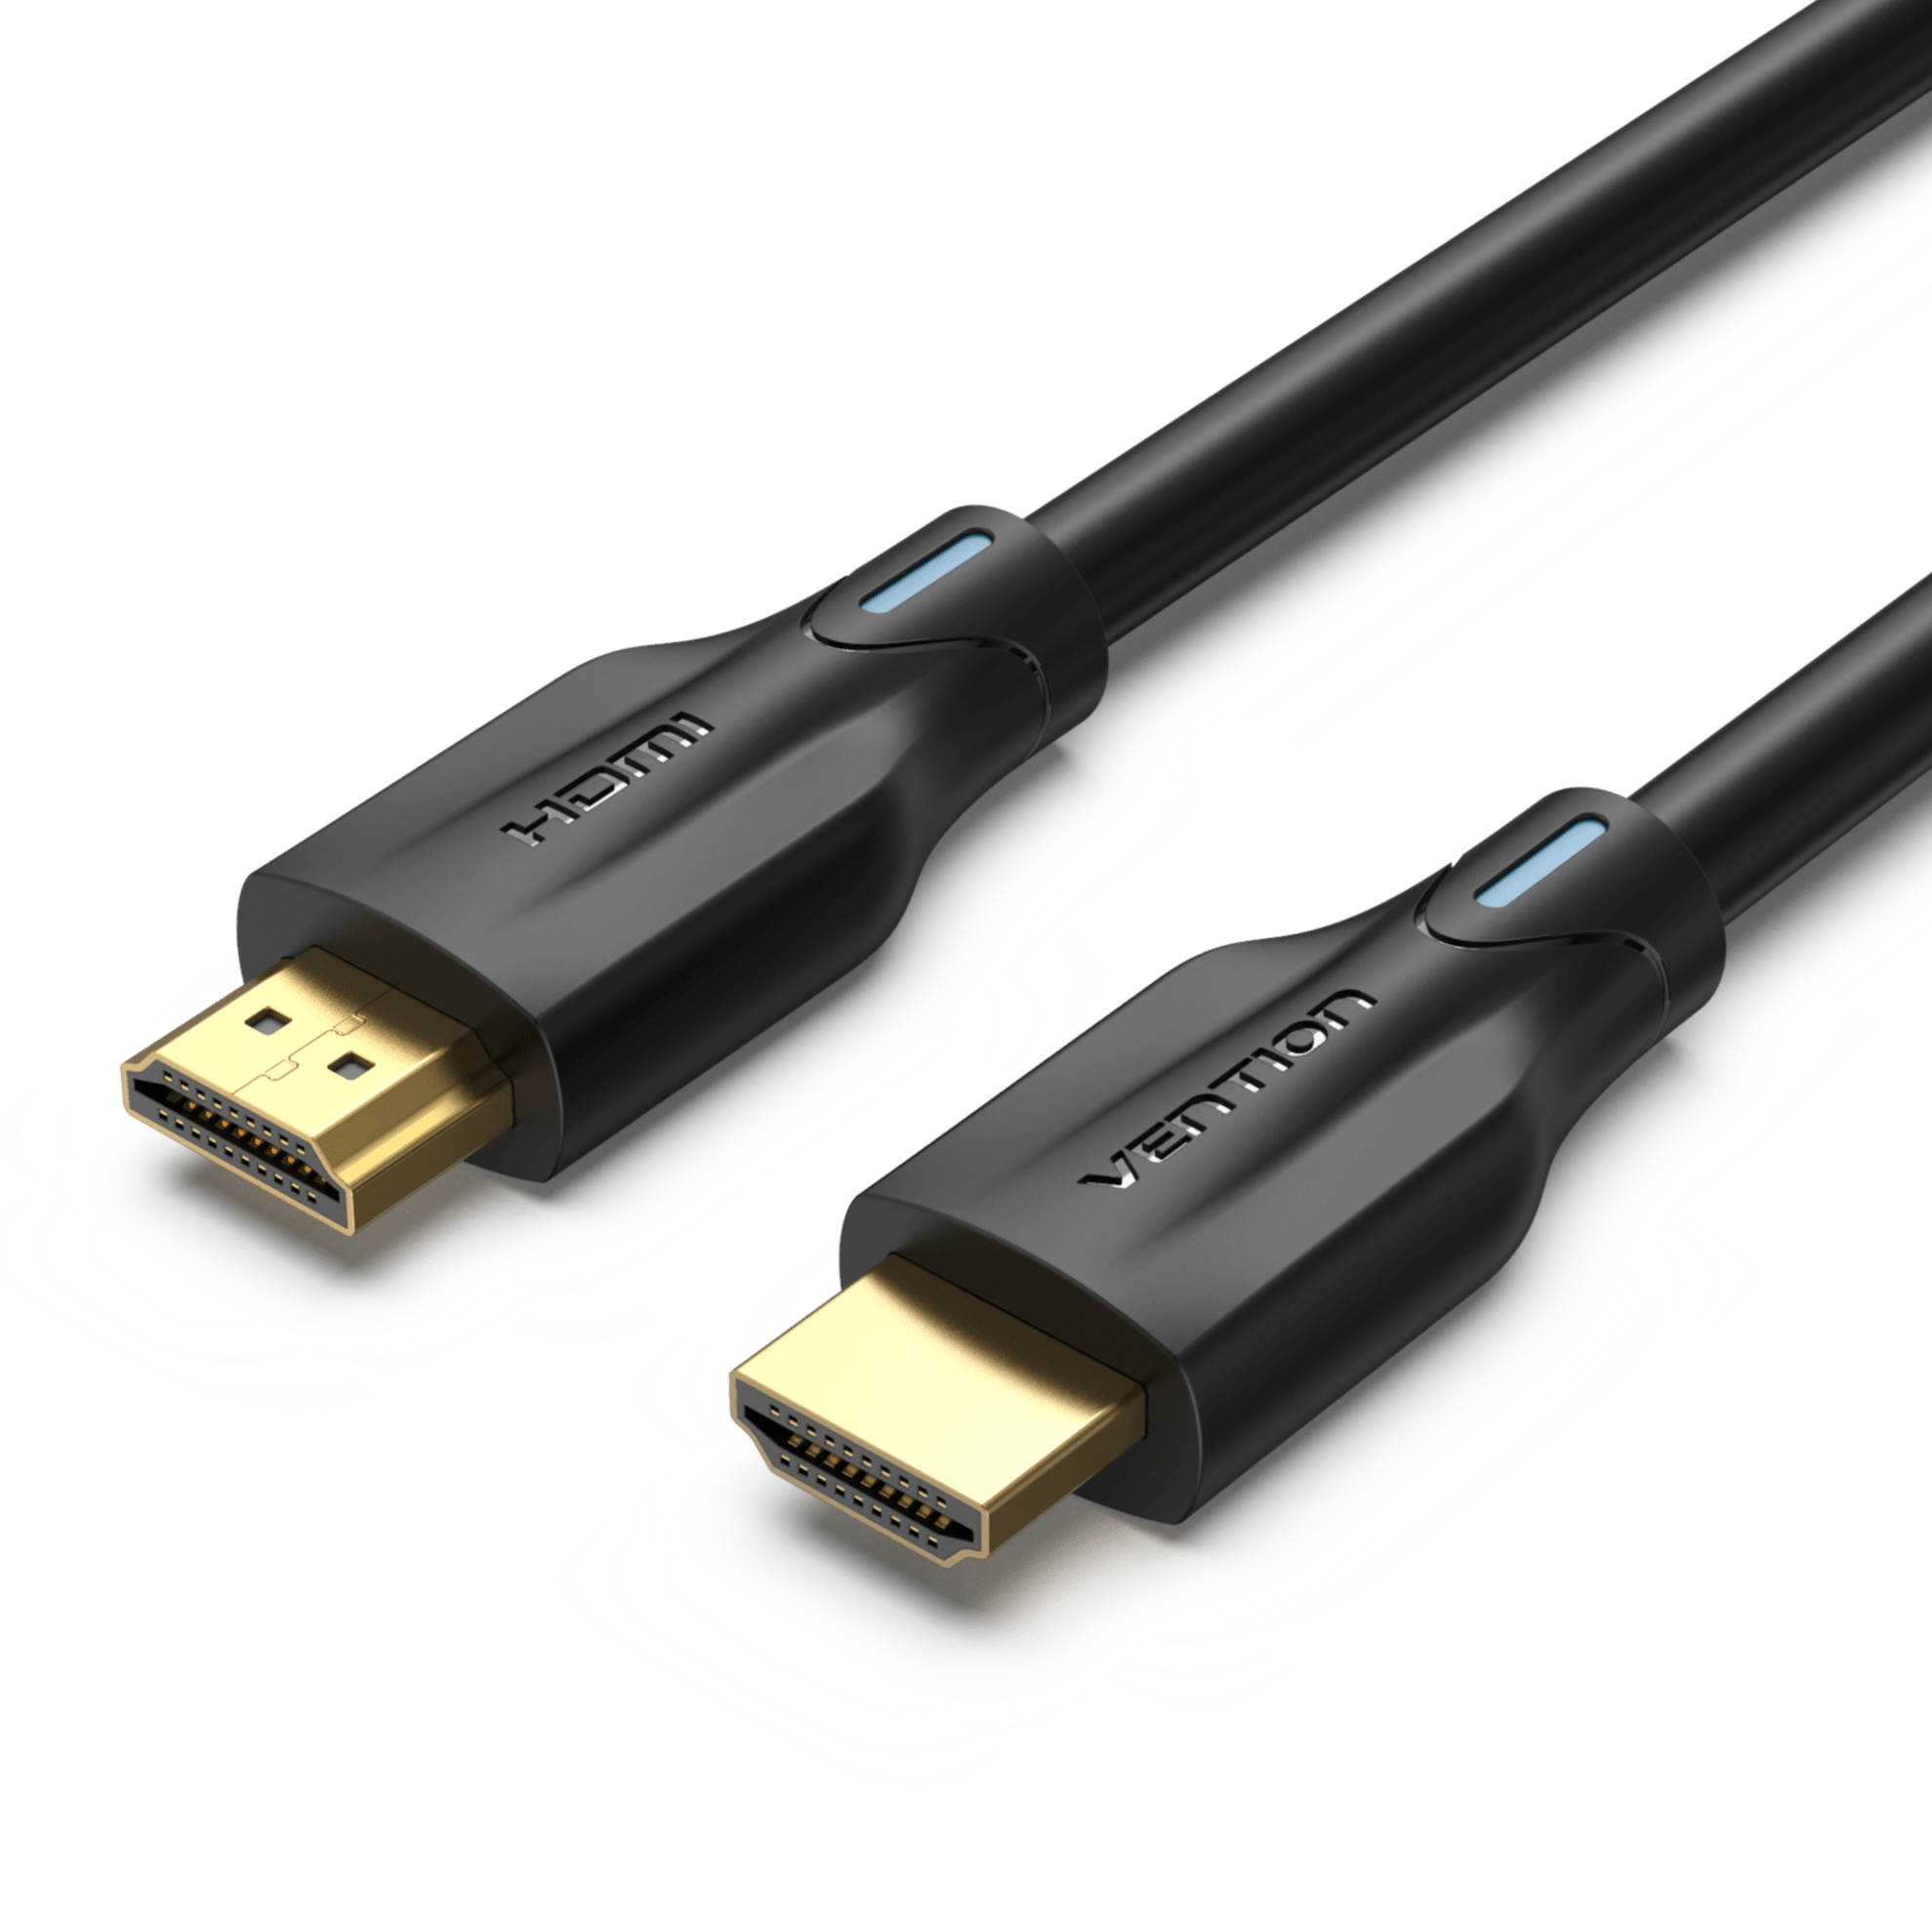 HDMI Cables: Types and Specifications Explained